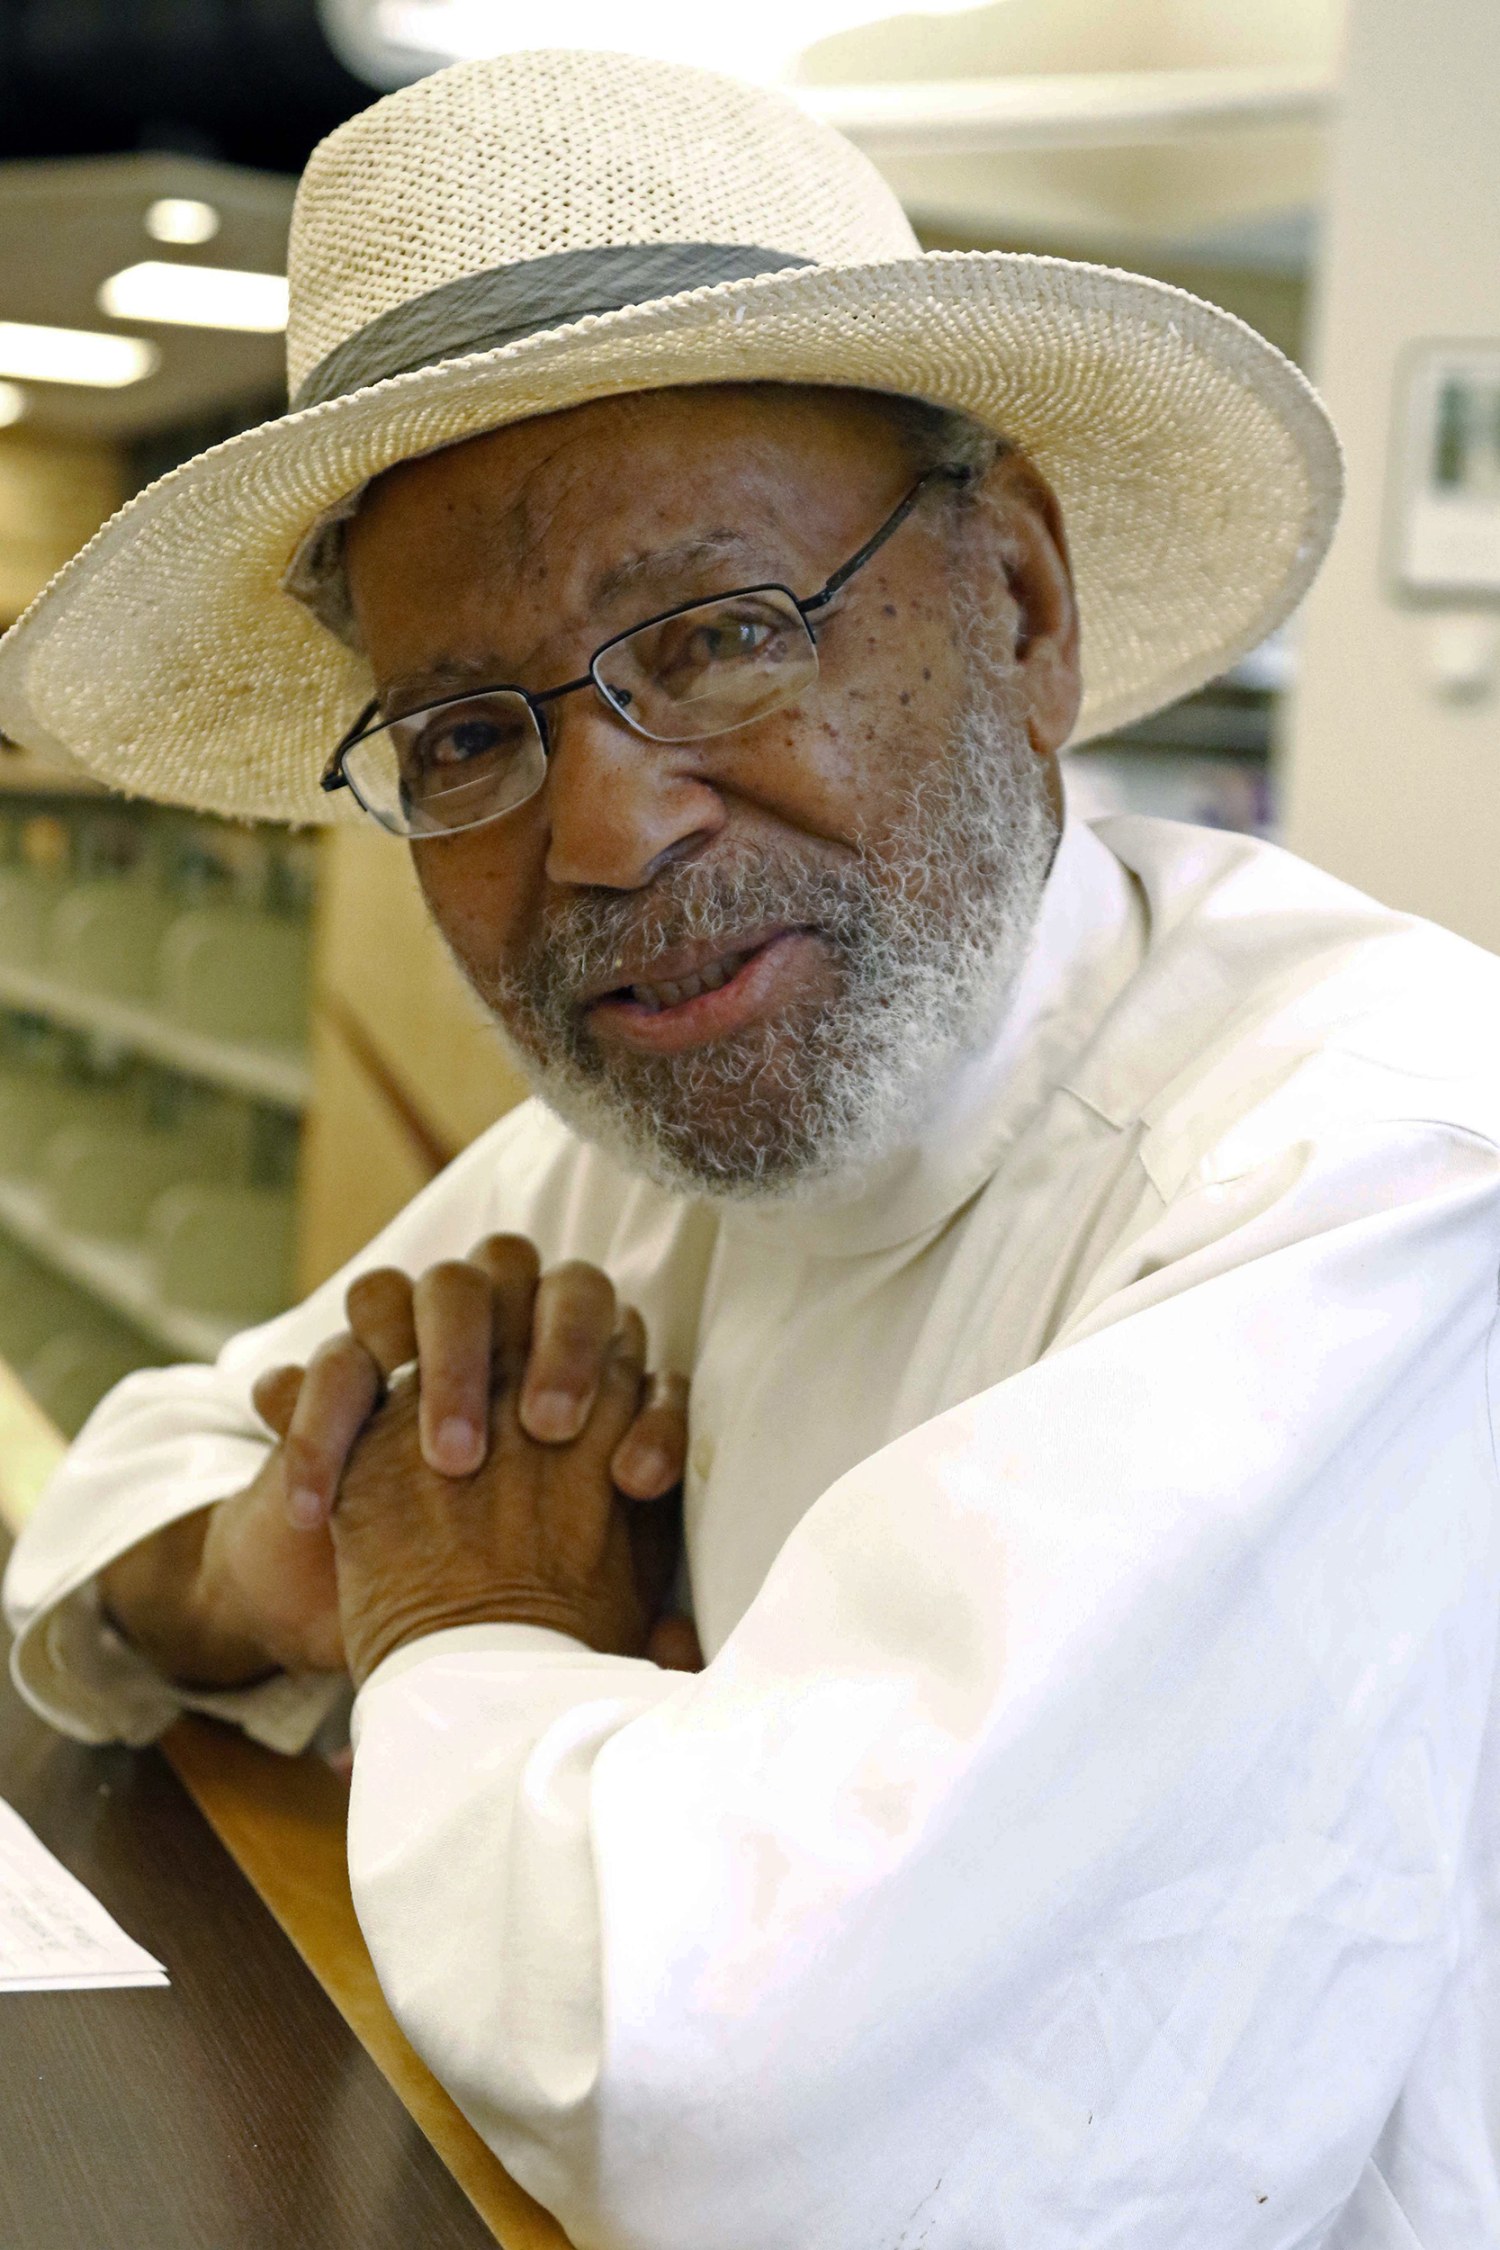 Civil Rights Legend James Meredith Says He Is On A New Mission From God